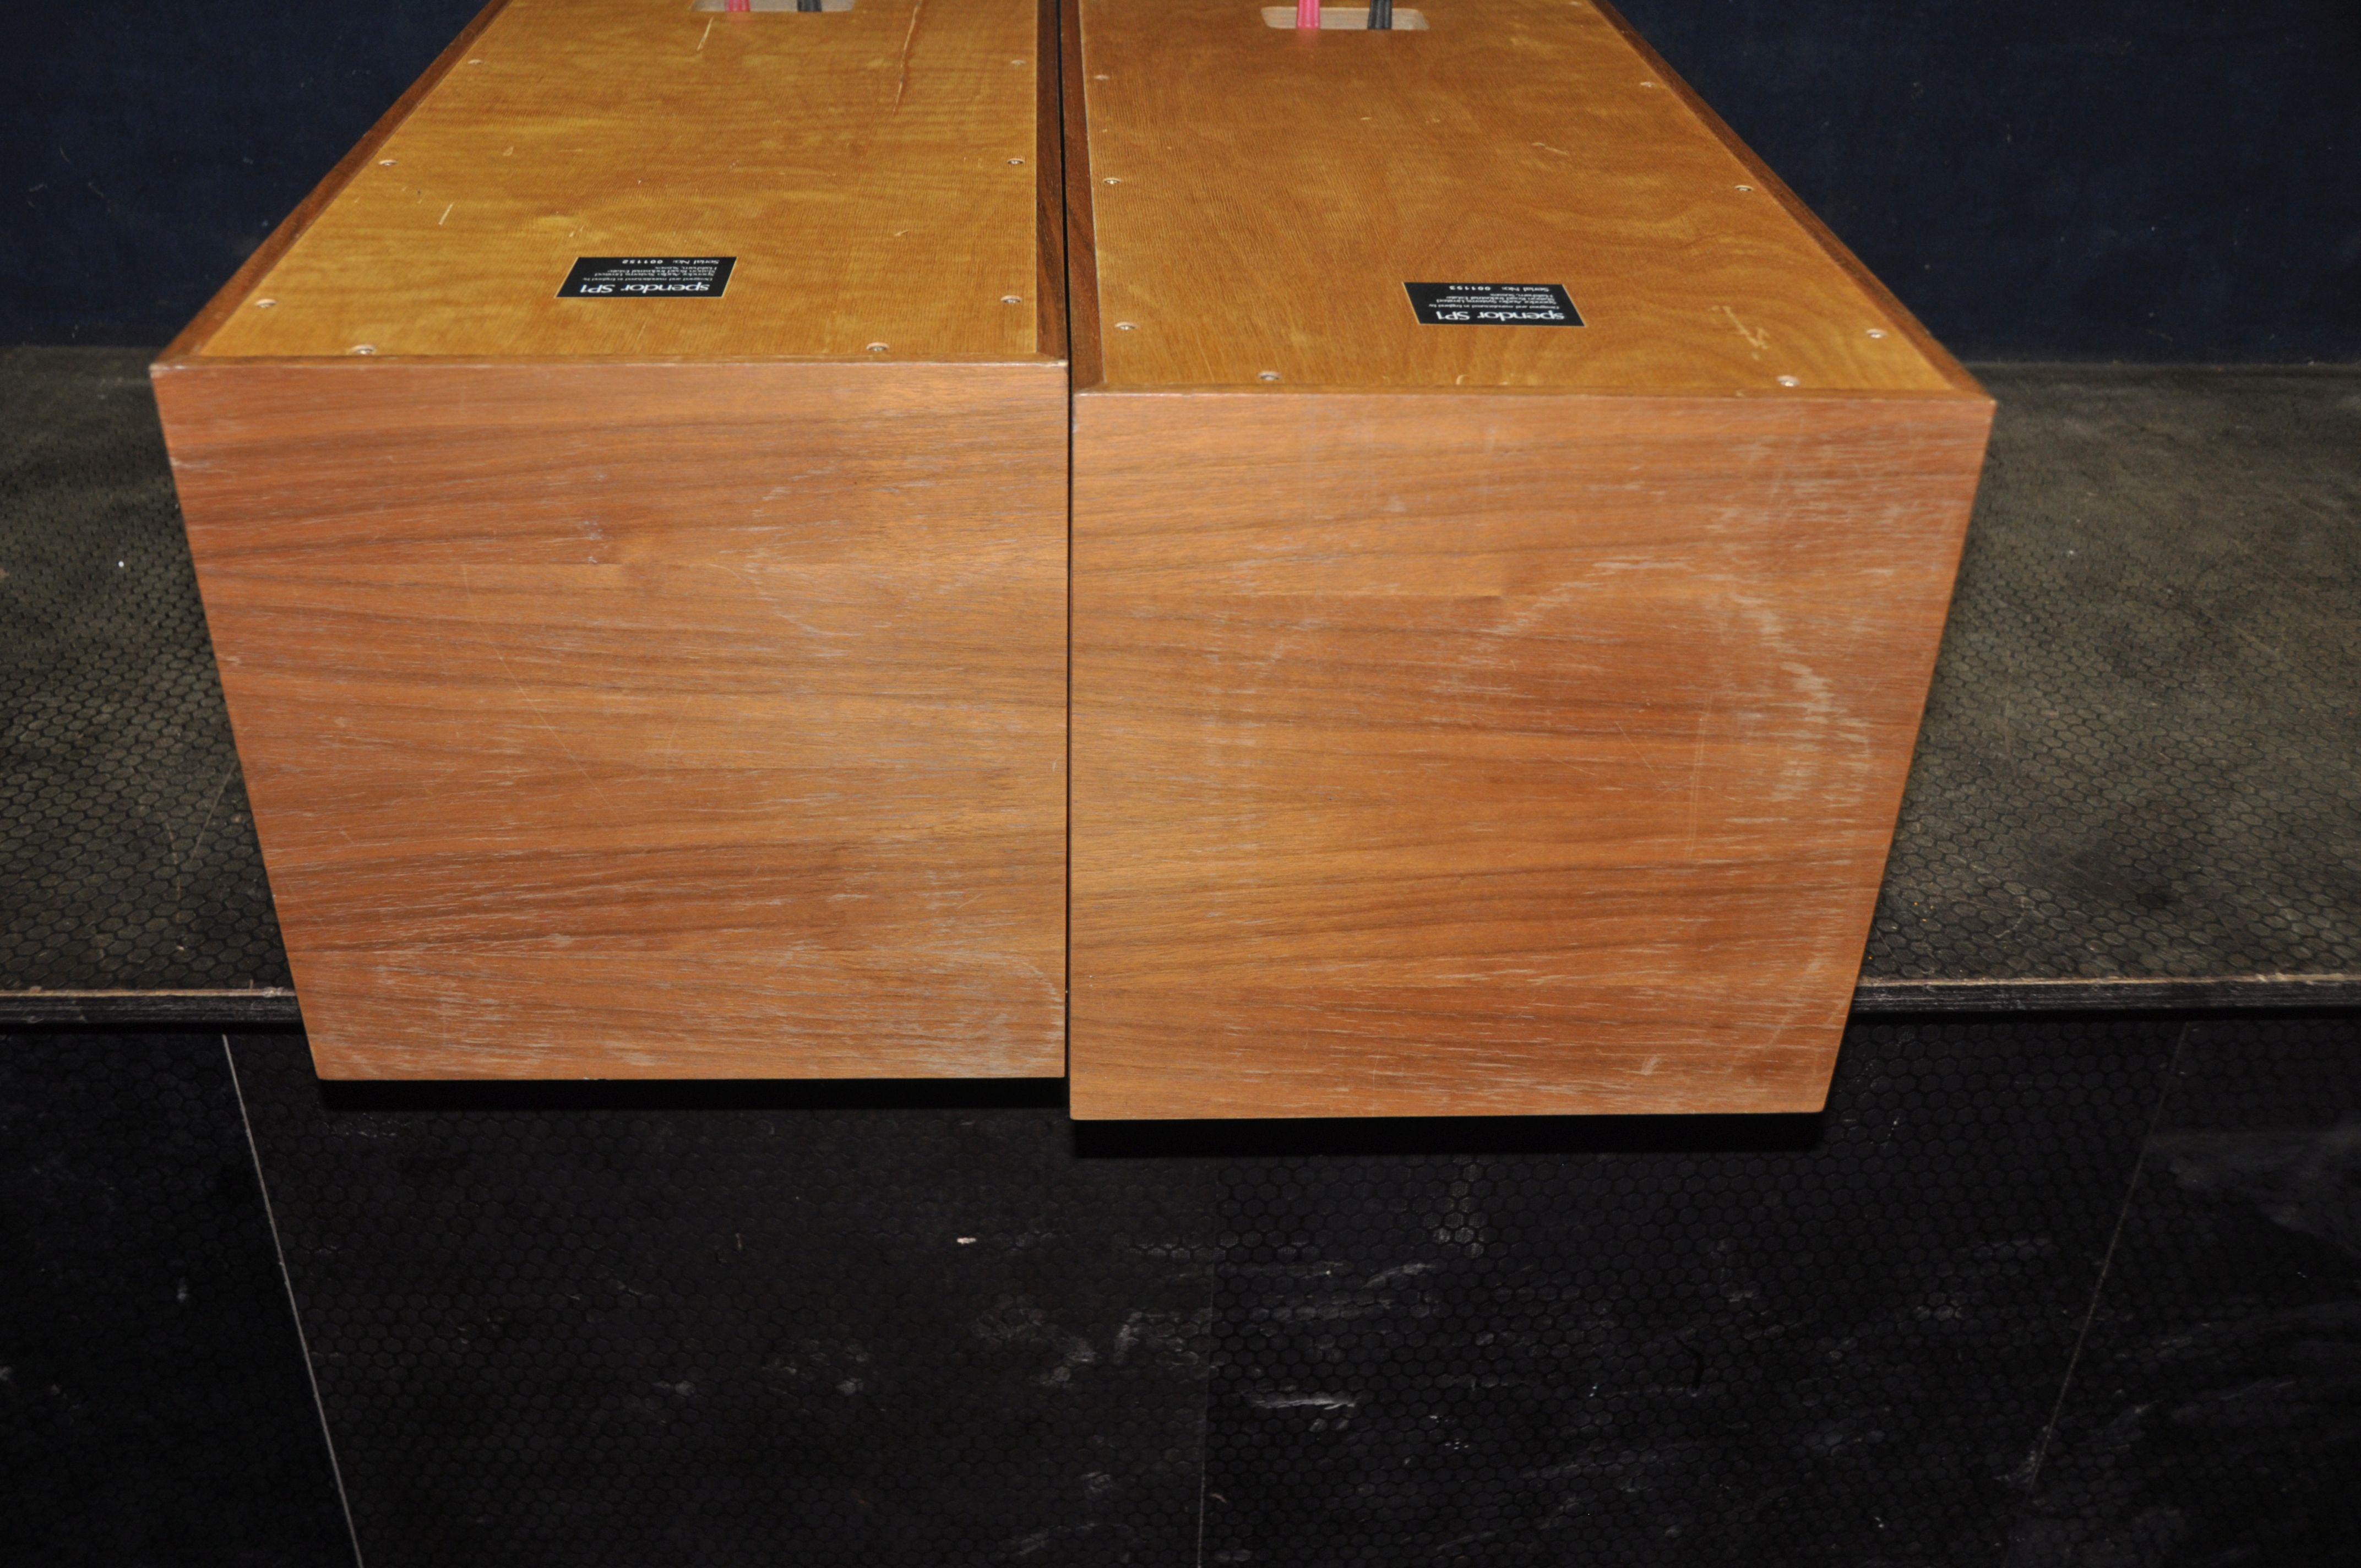 A PAIR OF SPENDOR SP1 VINTAGE HI FI SPEAKER CABINETS with two horns fitted but no 8in drivers in - Image 4 of 6